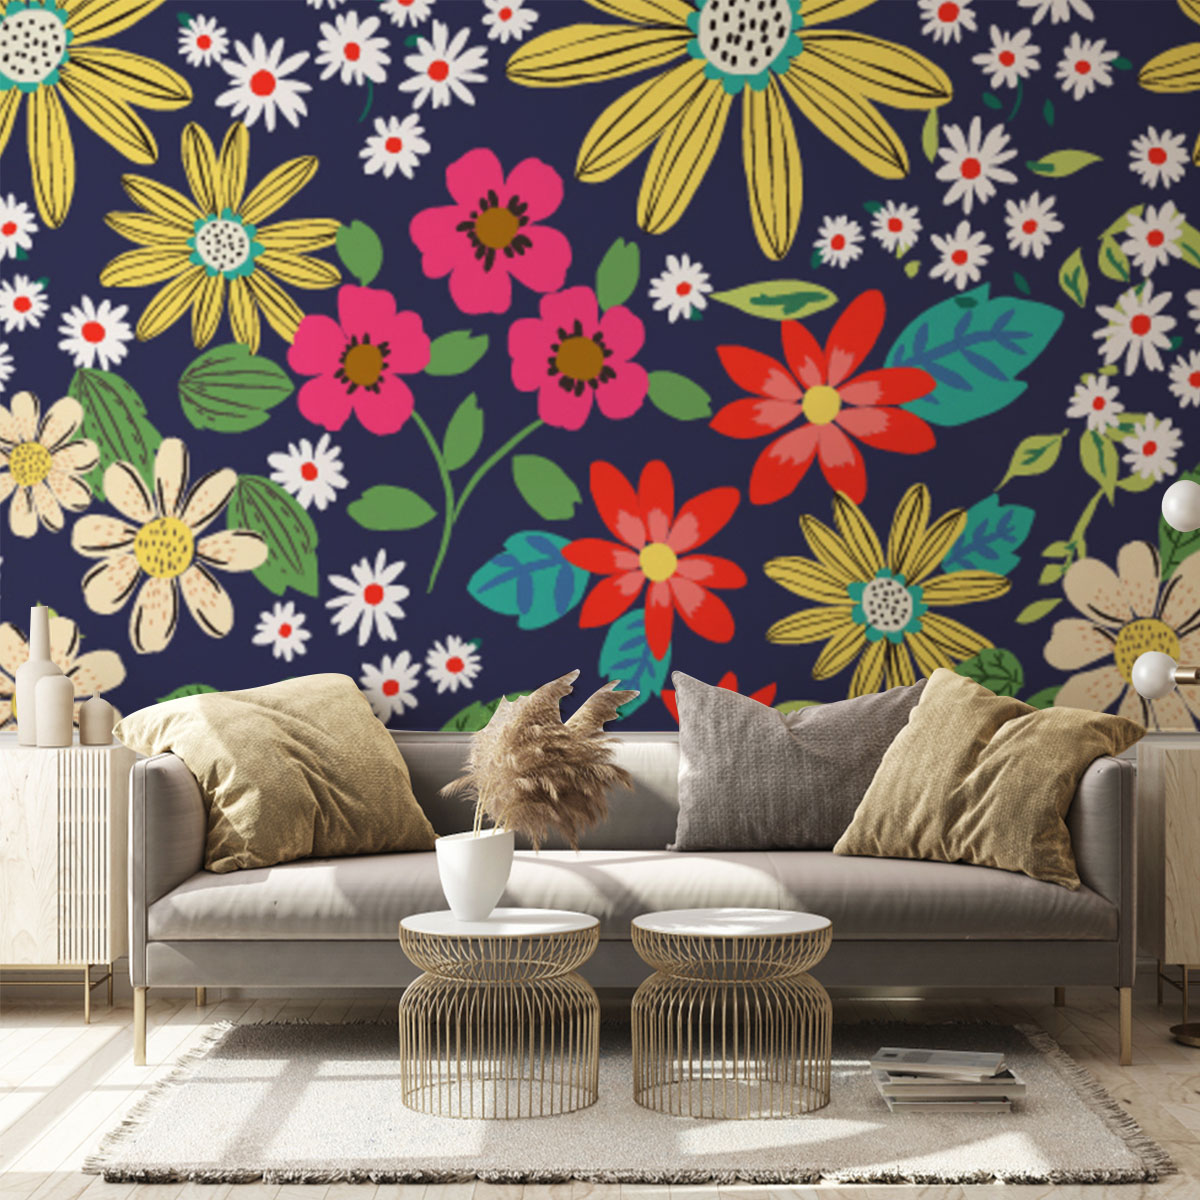 Colorful Daisy Wall Mural